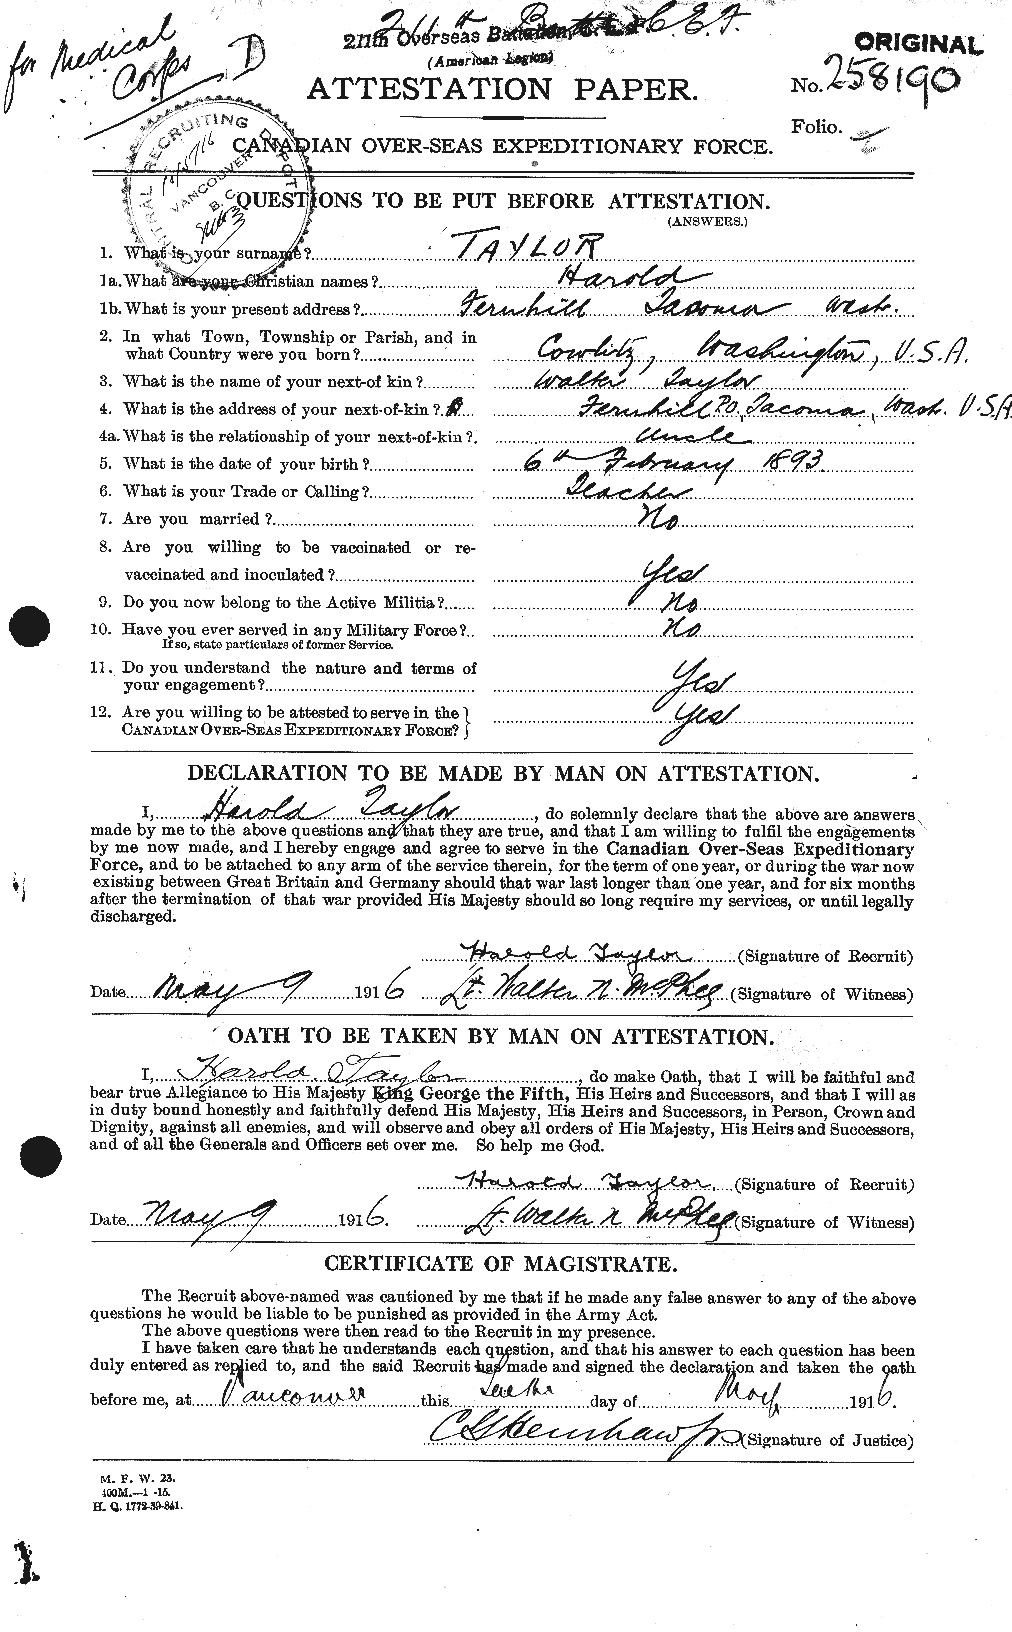 Personnel Records of the First World War - CEF 626407a